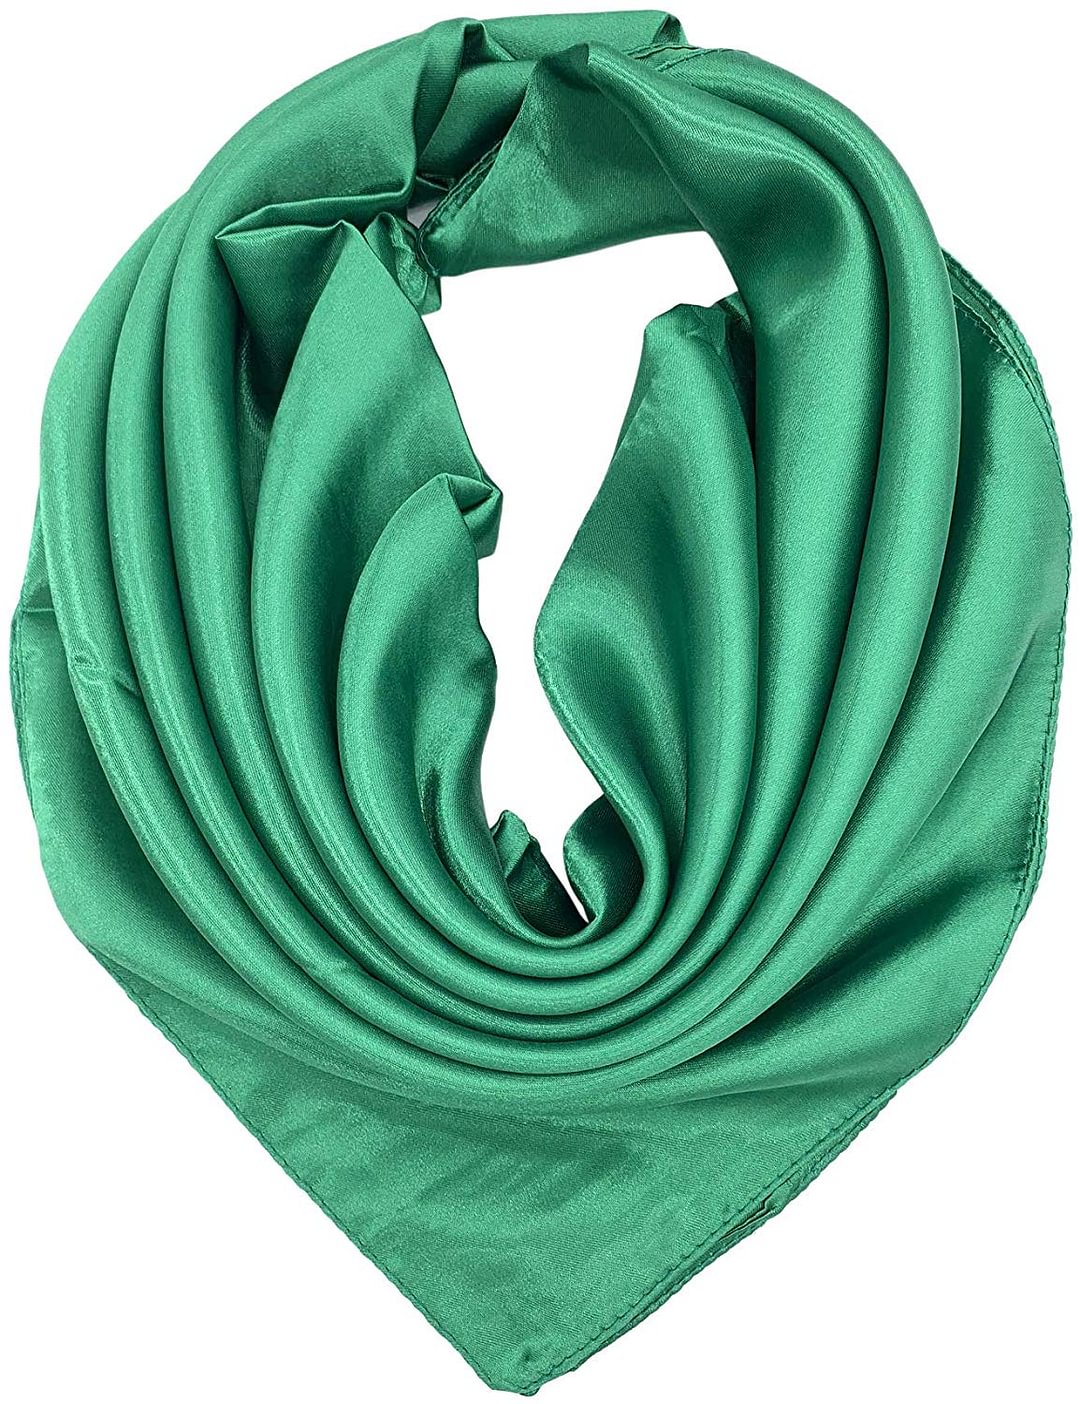 Silk Feeling Scarf Women's Fashion Pattern & Solid Color Large Square Satin Headscarf